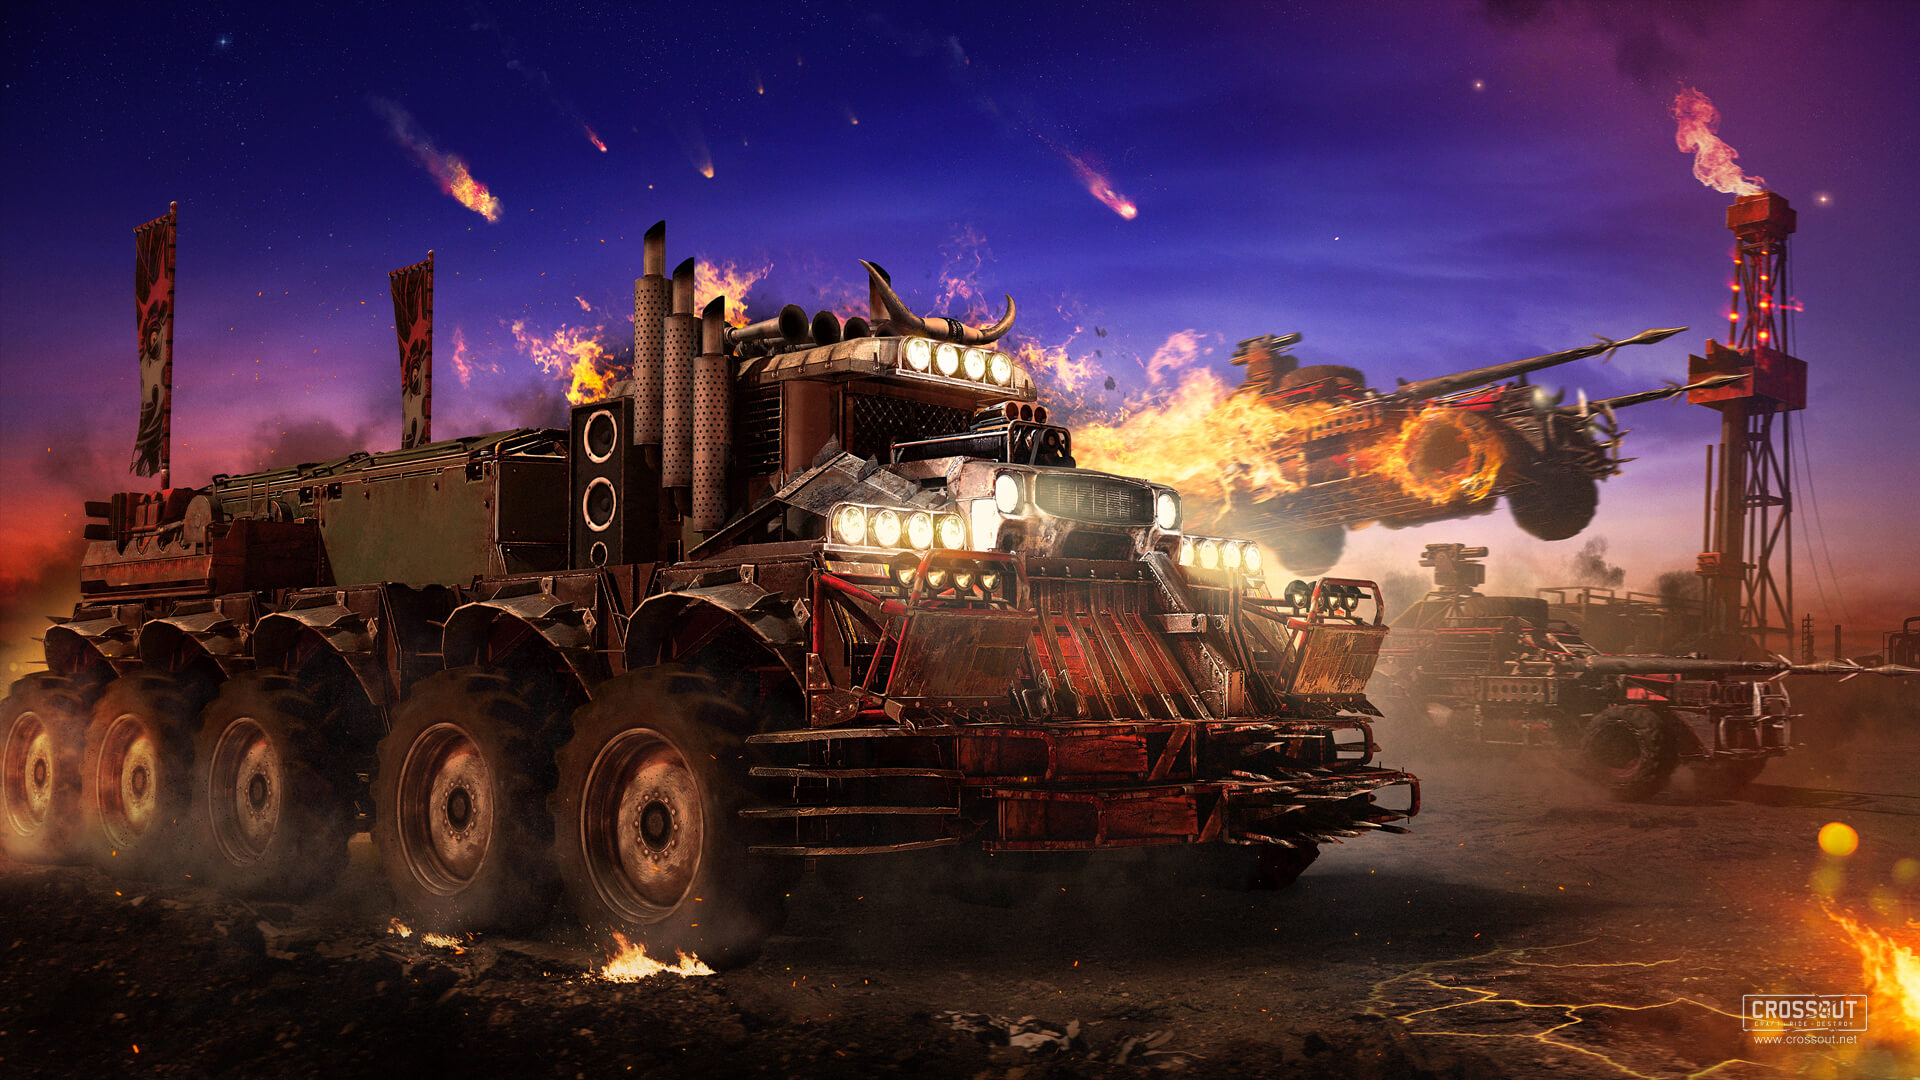 Cross out the excess. Игра кроссаут Crossout кроссаут. МАЗ 537 кроссаут. Кроссаут Синдикат обои. Дрейк кроссаут.